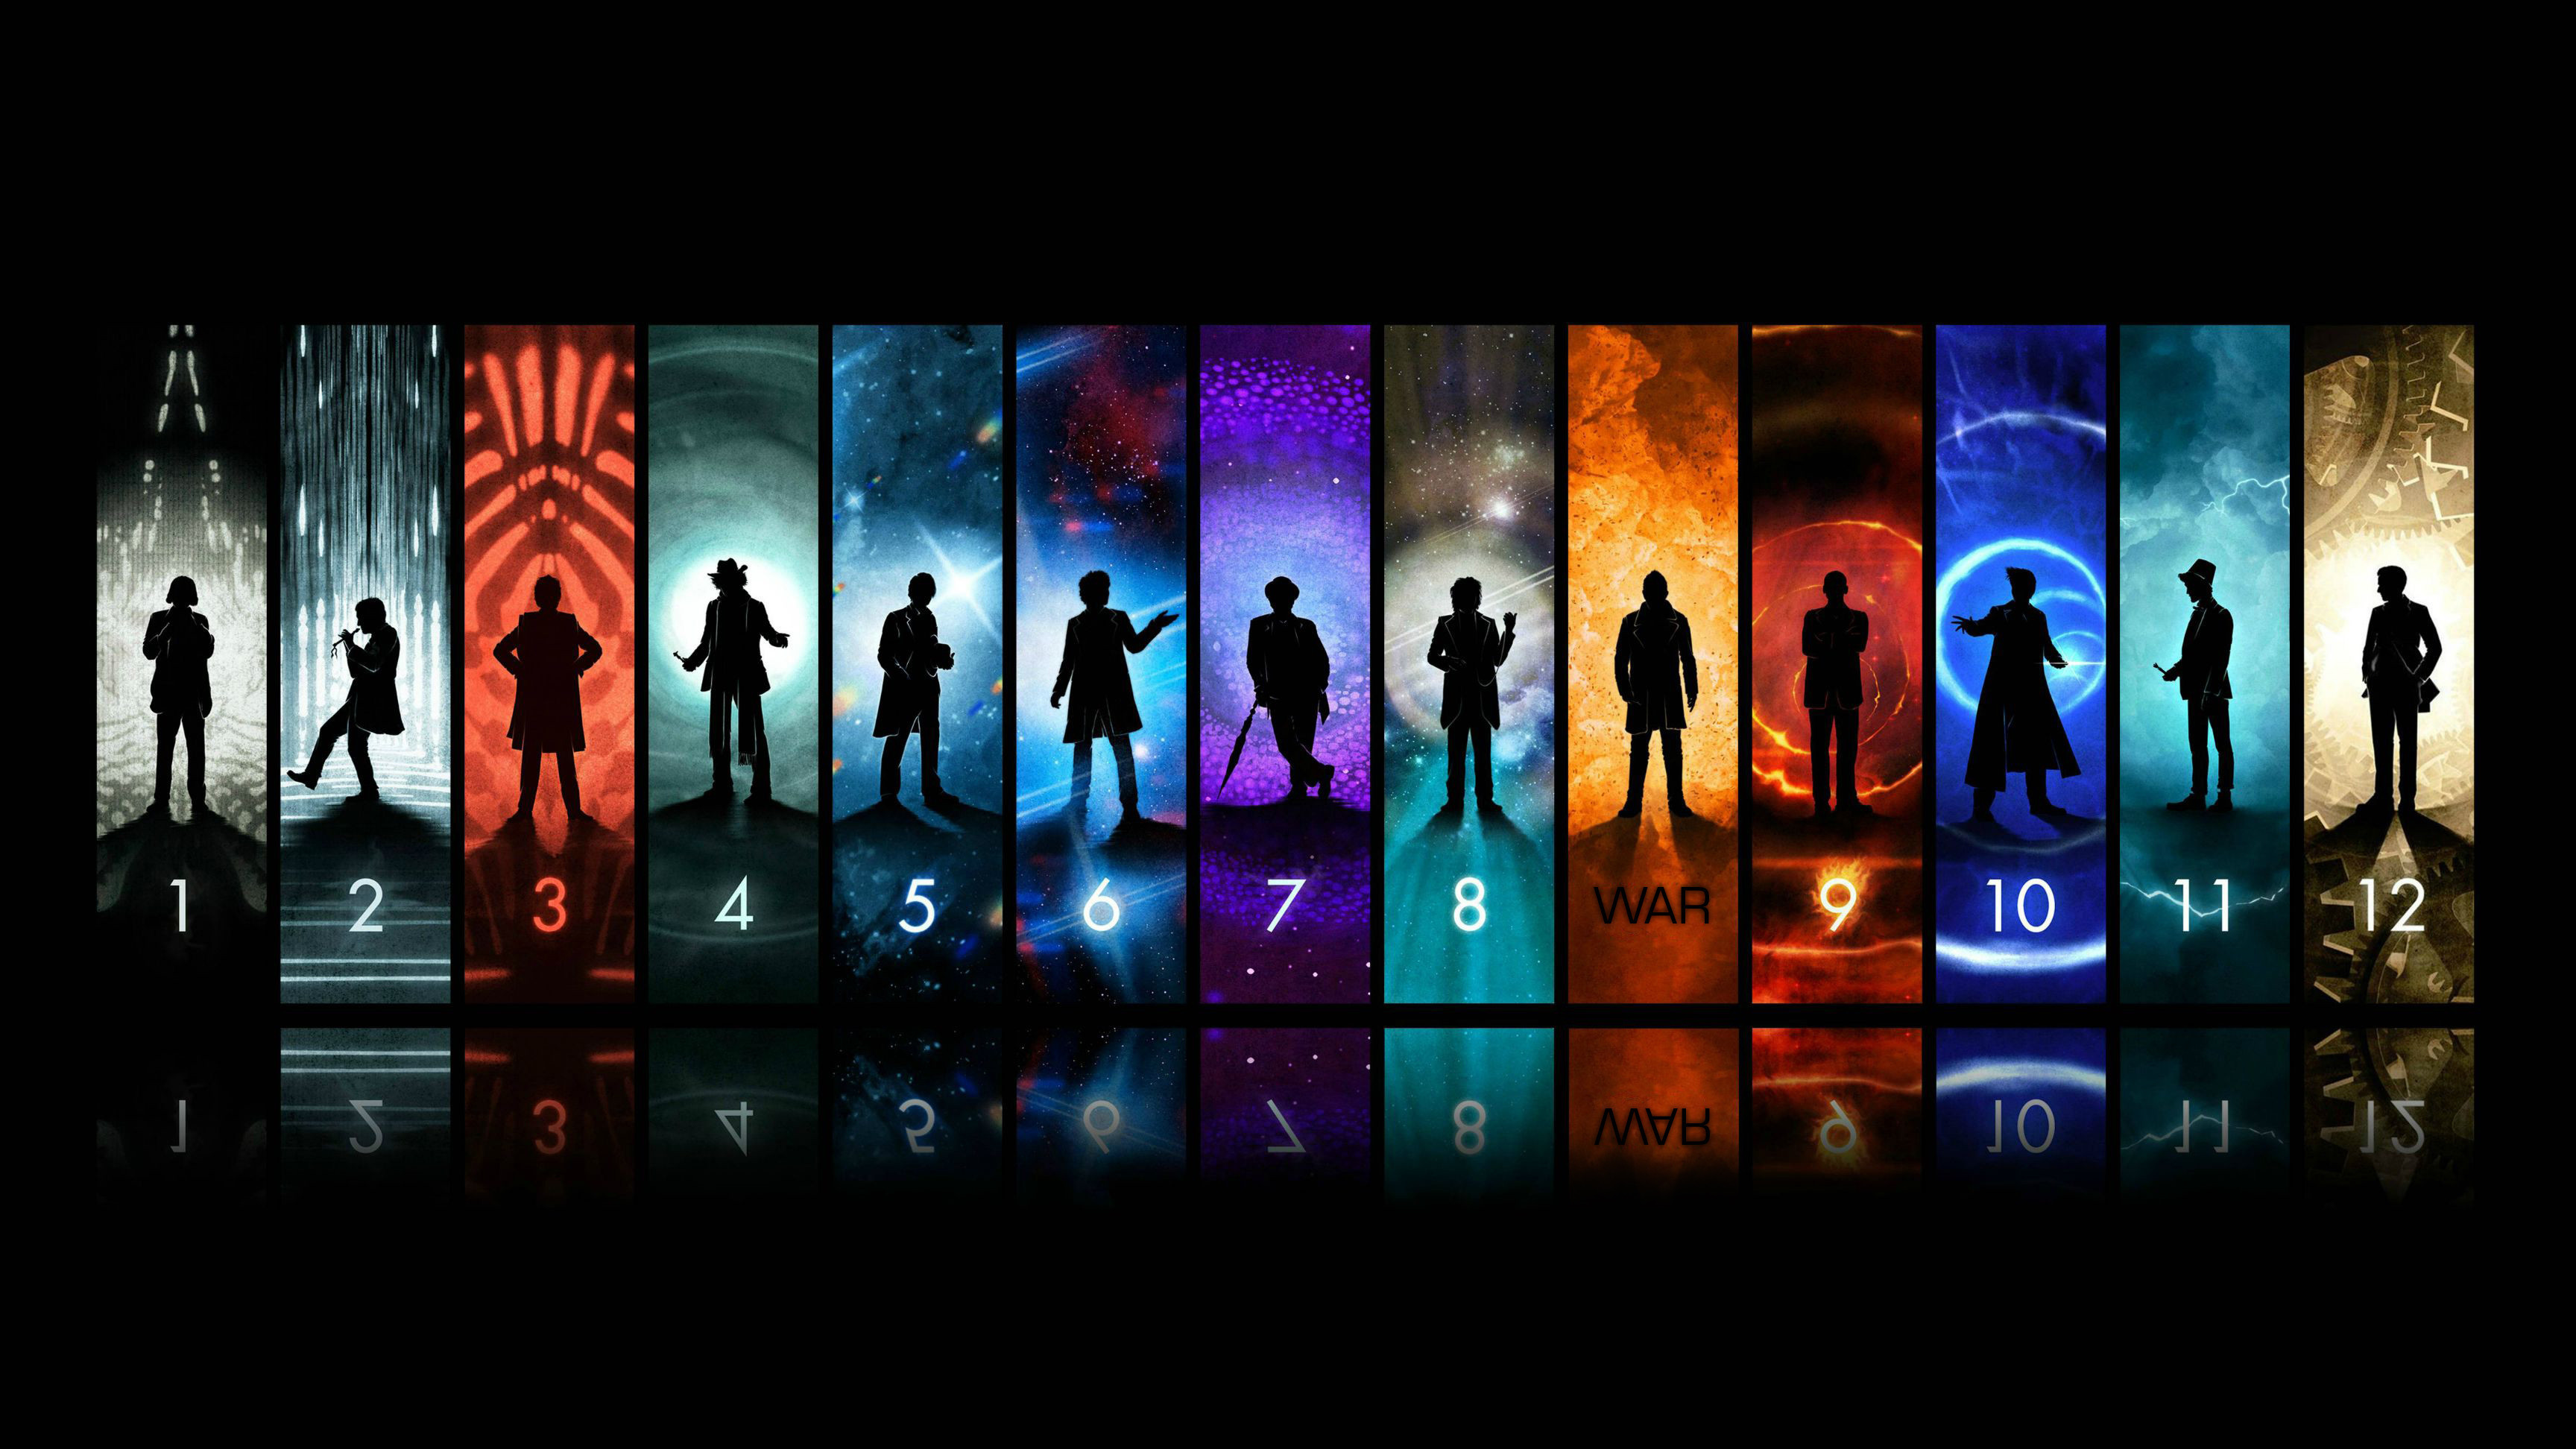 3456x1944 Doctor Who Wallpaper (1 through 12 with War)